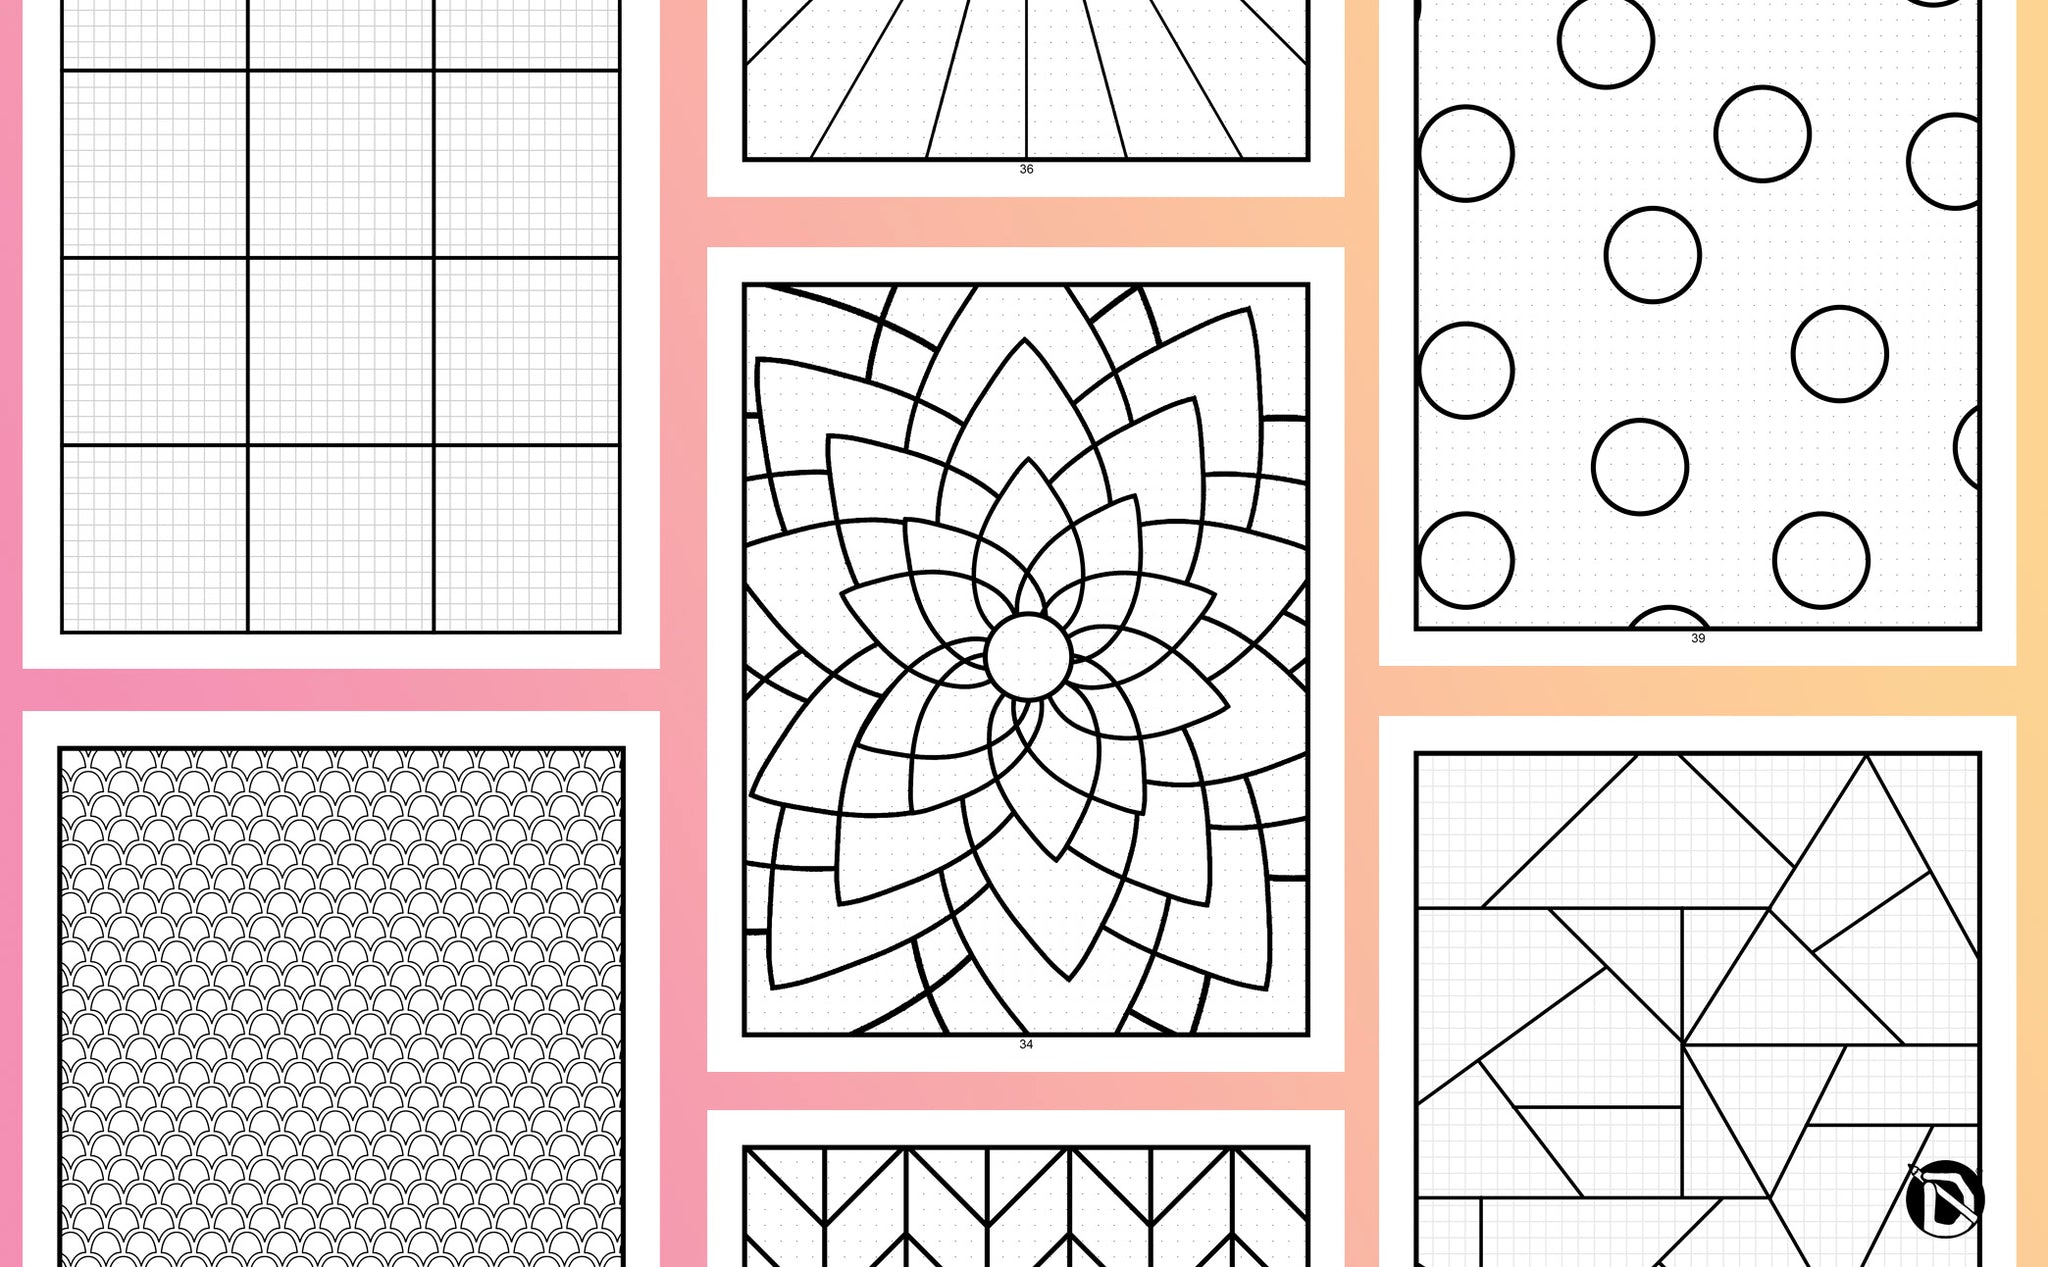 100+ Fun, Easy Patterns to Draw | Easy patterns to draw, Pattern drawing,  Doodle patterns